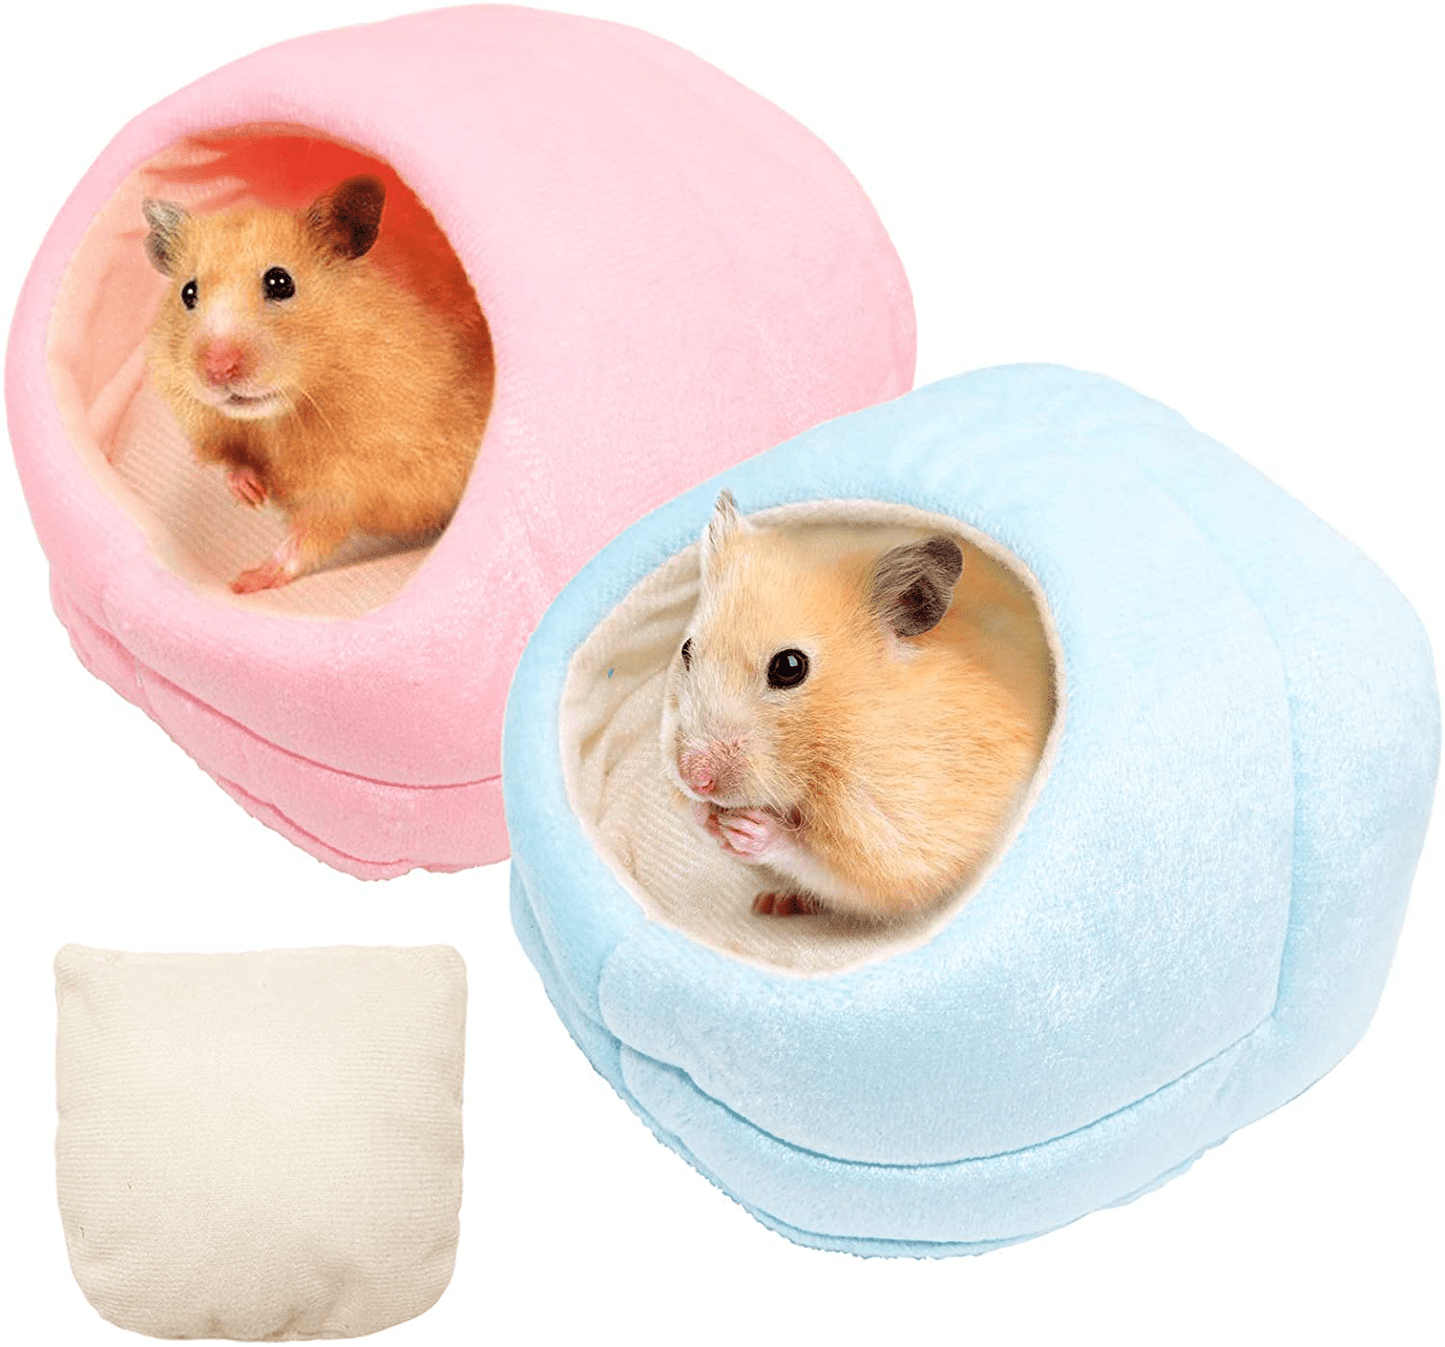 2 Packs Hamster Slippers House, Small Animal Thermal Pad Sleeping Bag House, Small Pet Slippers Nest, Guinea Pig Hedgehog Squirrel Winter Cold-Proof Warm House, Removable Cage Nest Room Accessories